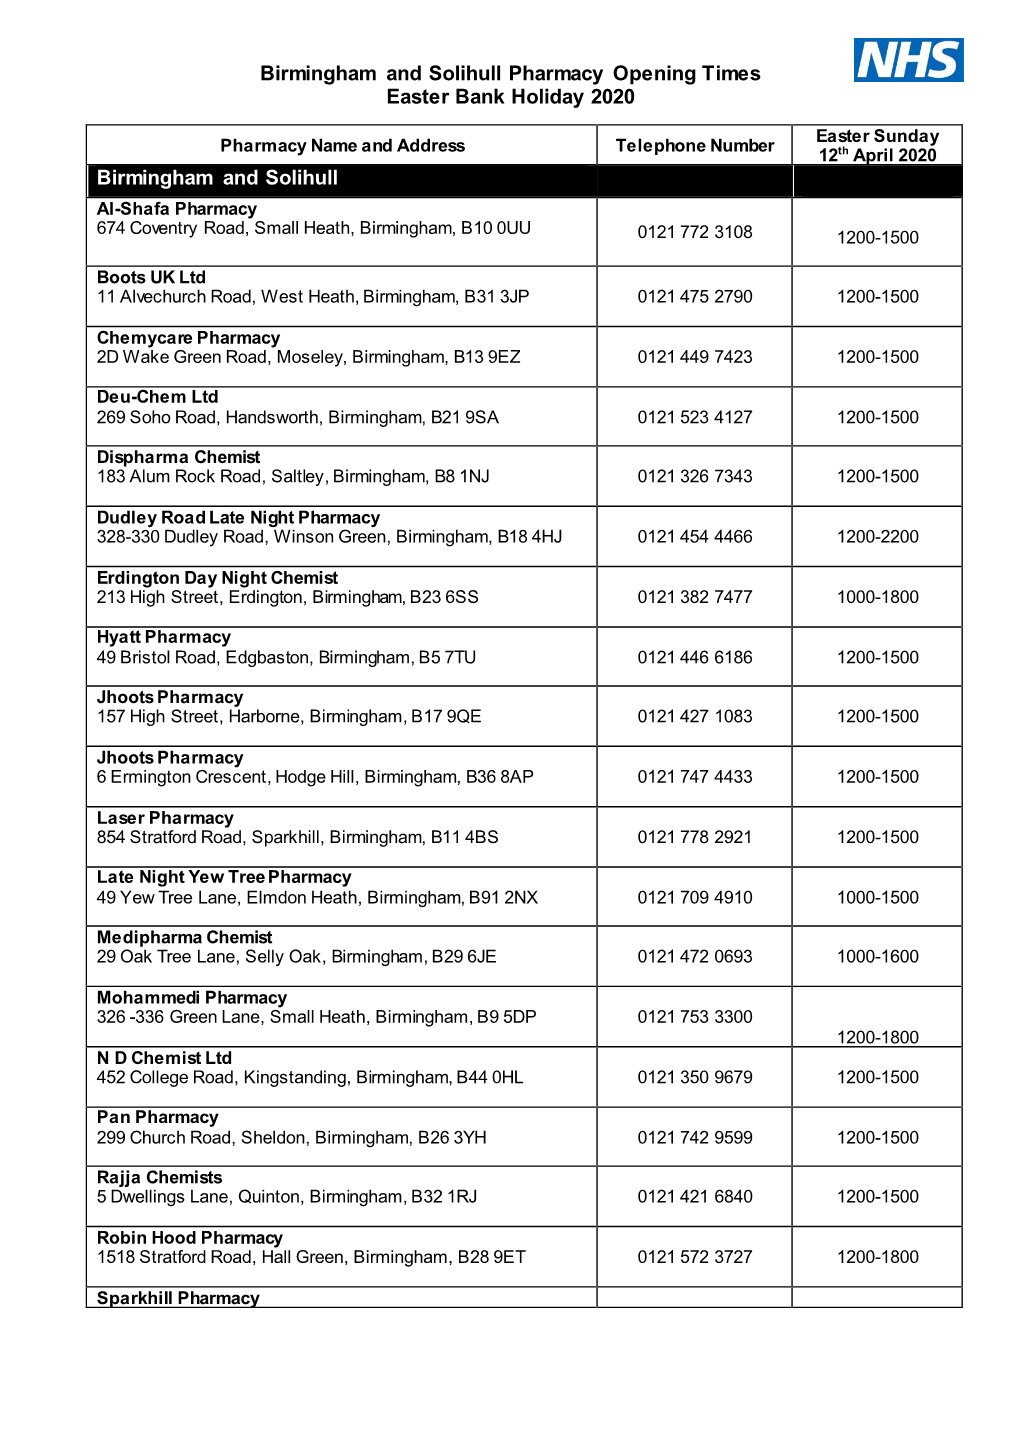 Birmingham and Solihull Pharmacy Opening Times Easter Bank Holiday 2020